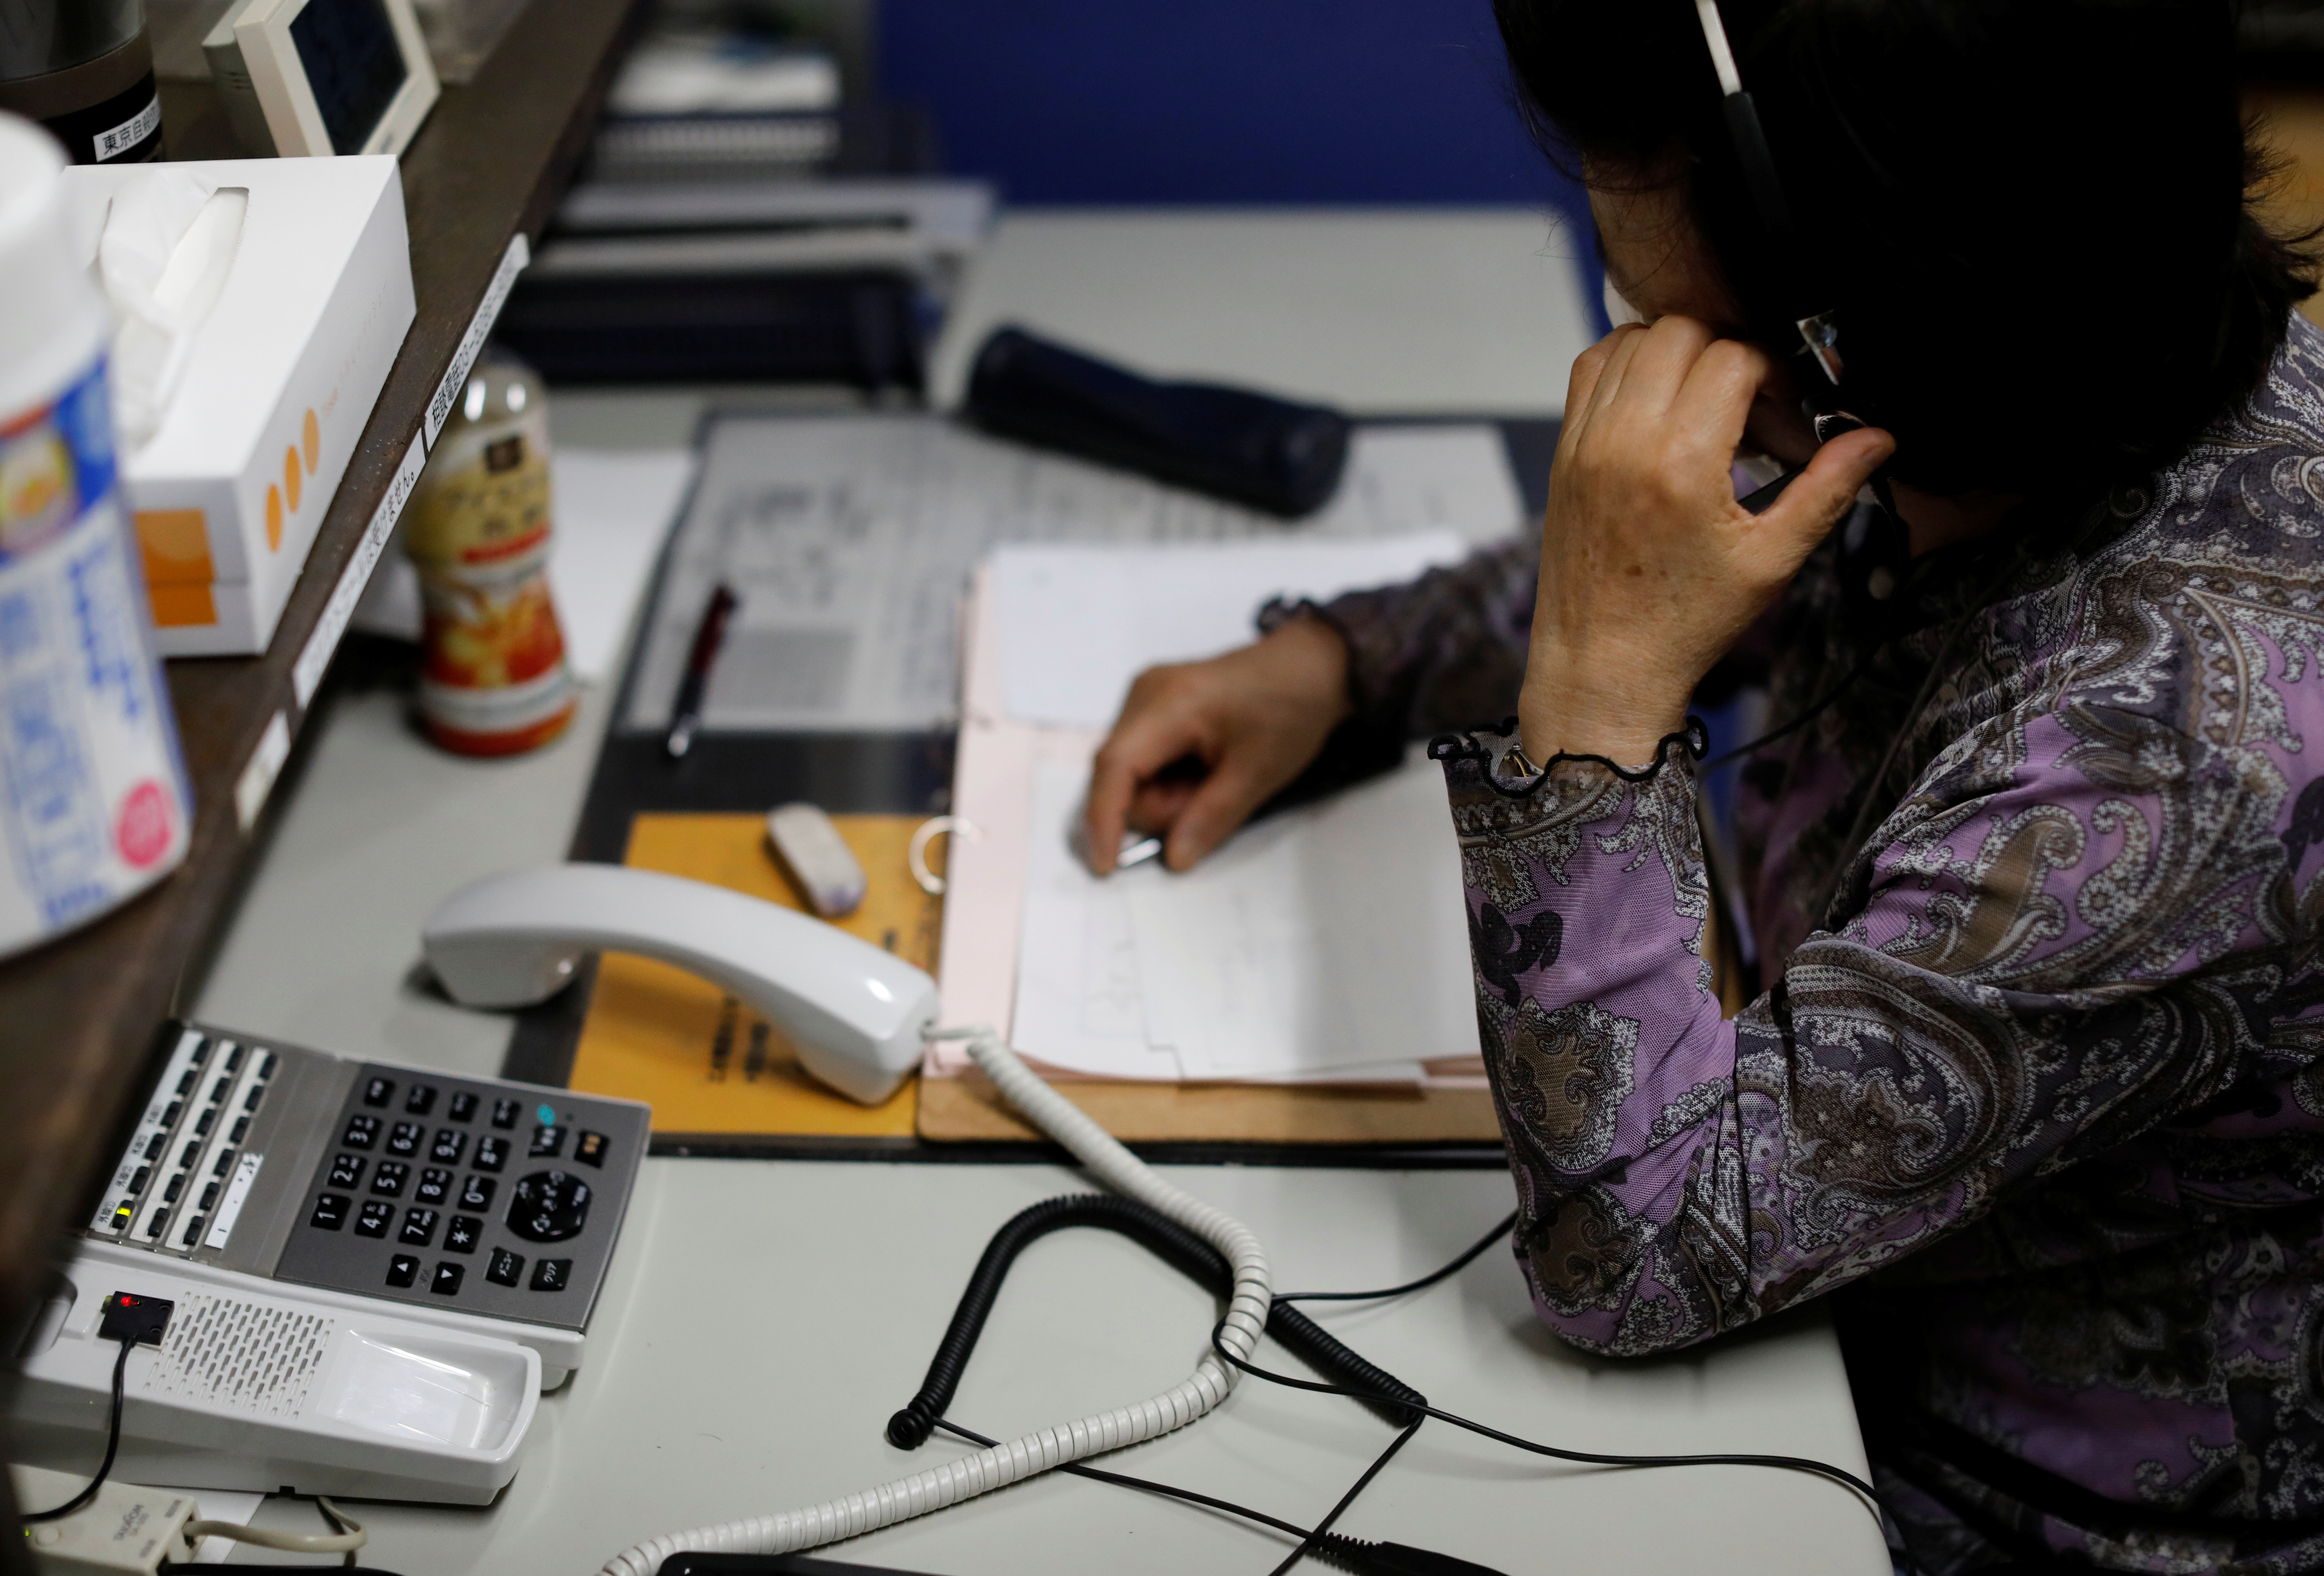 A volunteer responds an incoming call at the Tokyo Befrienders call center, a Tokyo's suicide hotline center, during the spread of the coronavirus disease (COVID-19), in Tokyo